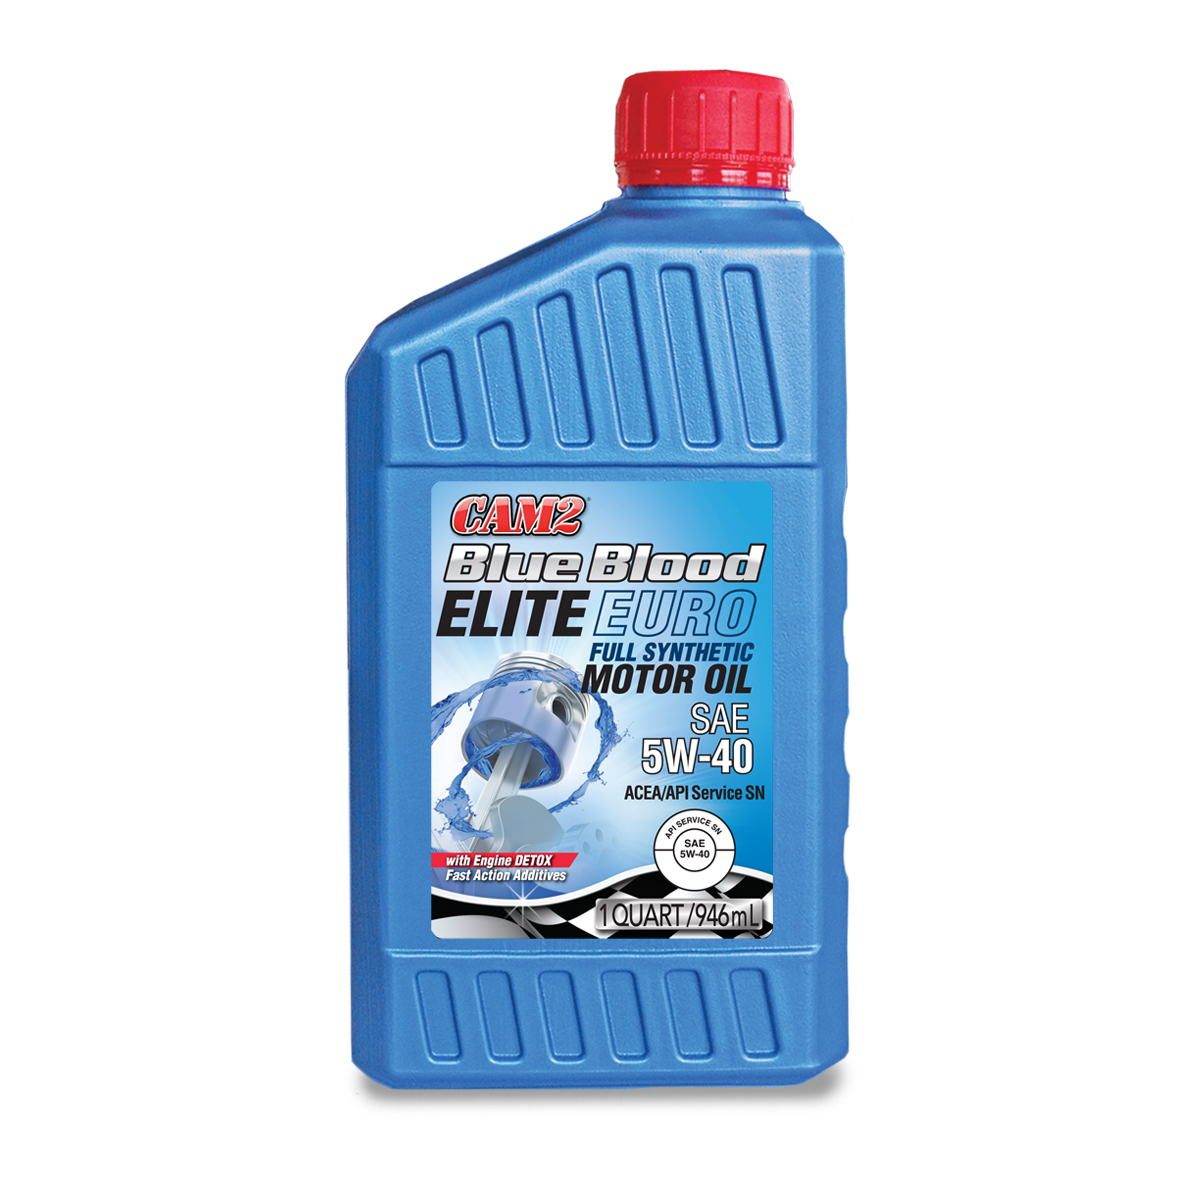 CAM2 BLUE BLOOD ELITE EURO 5W-40 FULL SYNTHETIC ENGINE OIL 80565-382